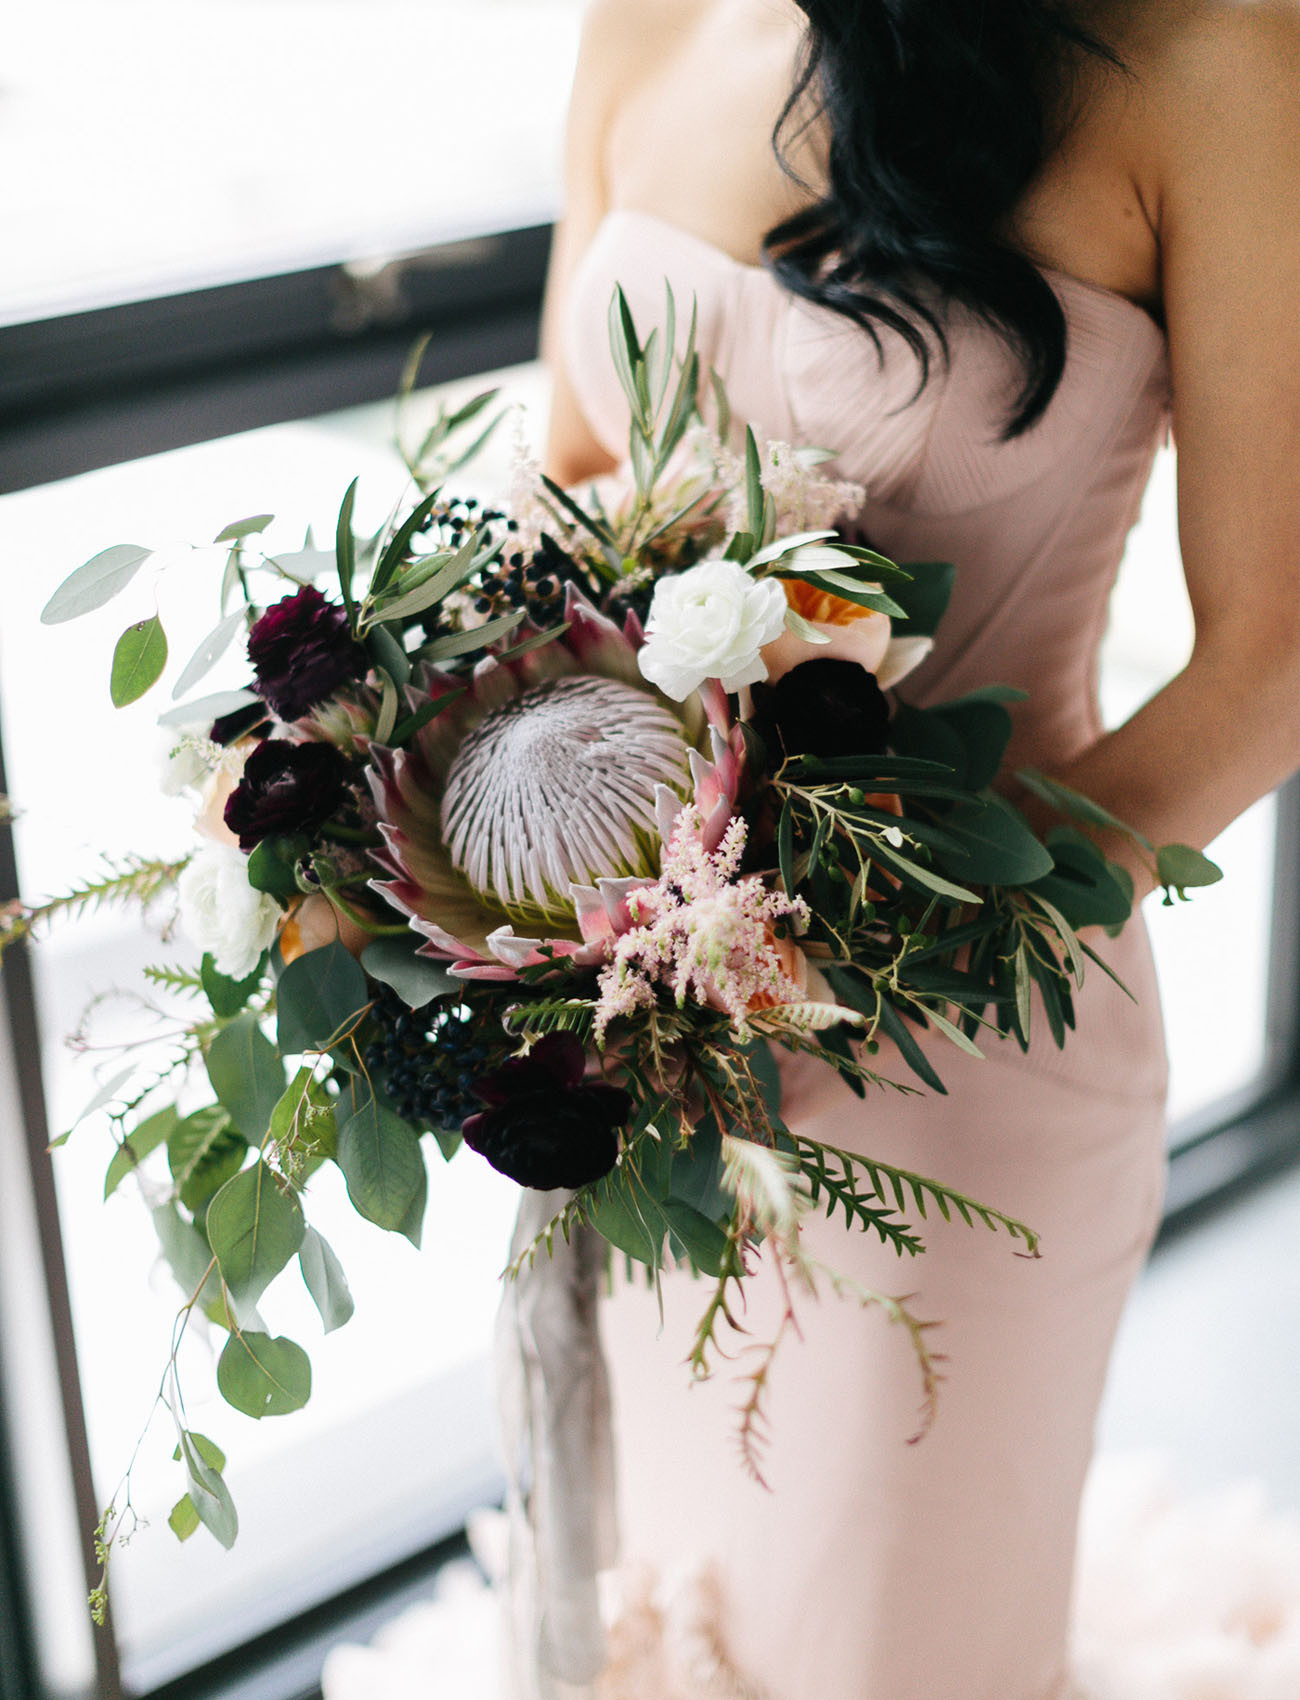 Modern Wedding Flowers
 The Bride Wore a Stunning Blush Dress at this Industrial